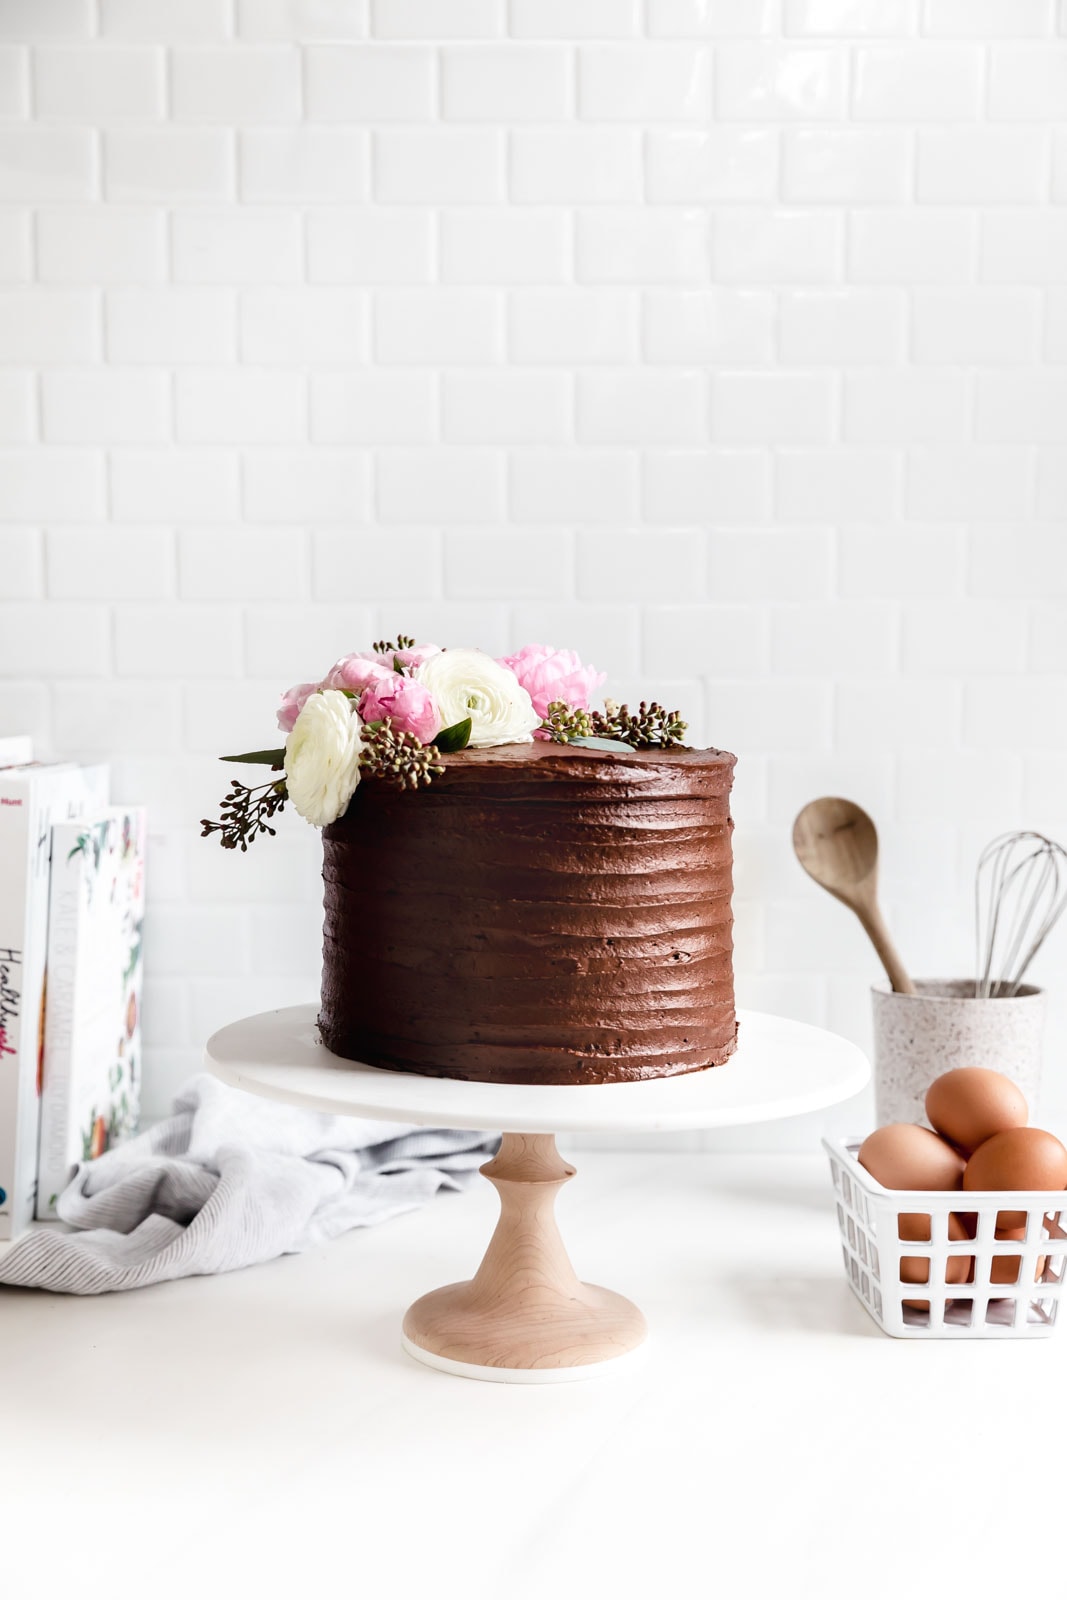 Make any day feel like a birthday with the best ever vanilla cake with chocolate frosting. This cake IS the celebration!